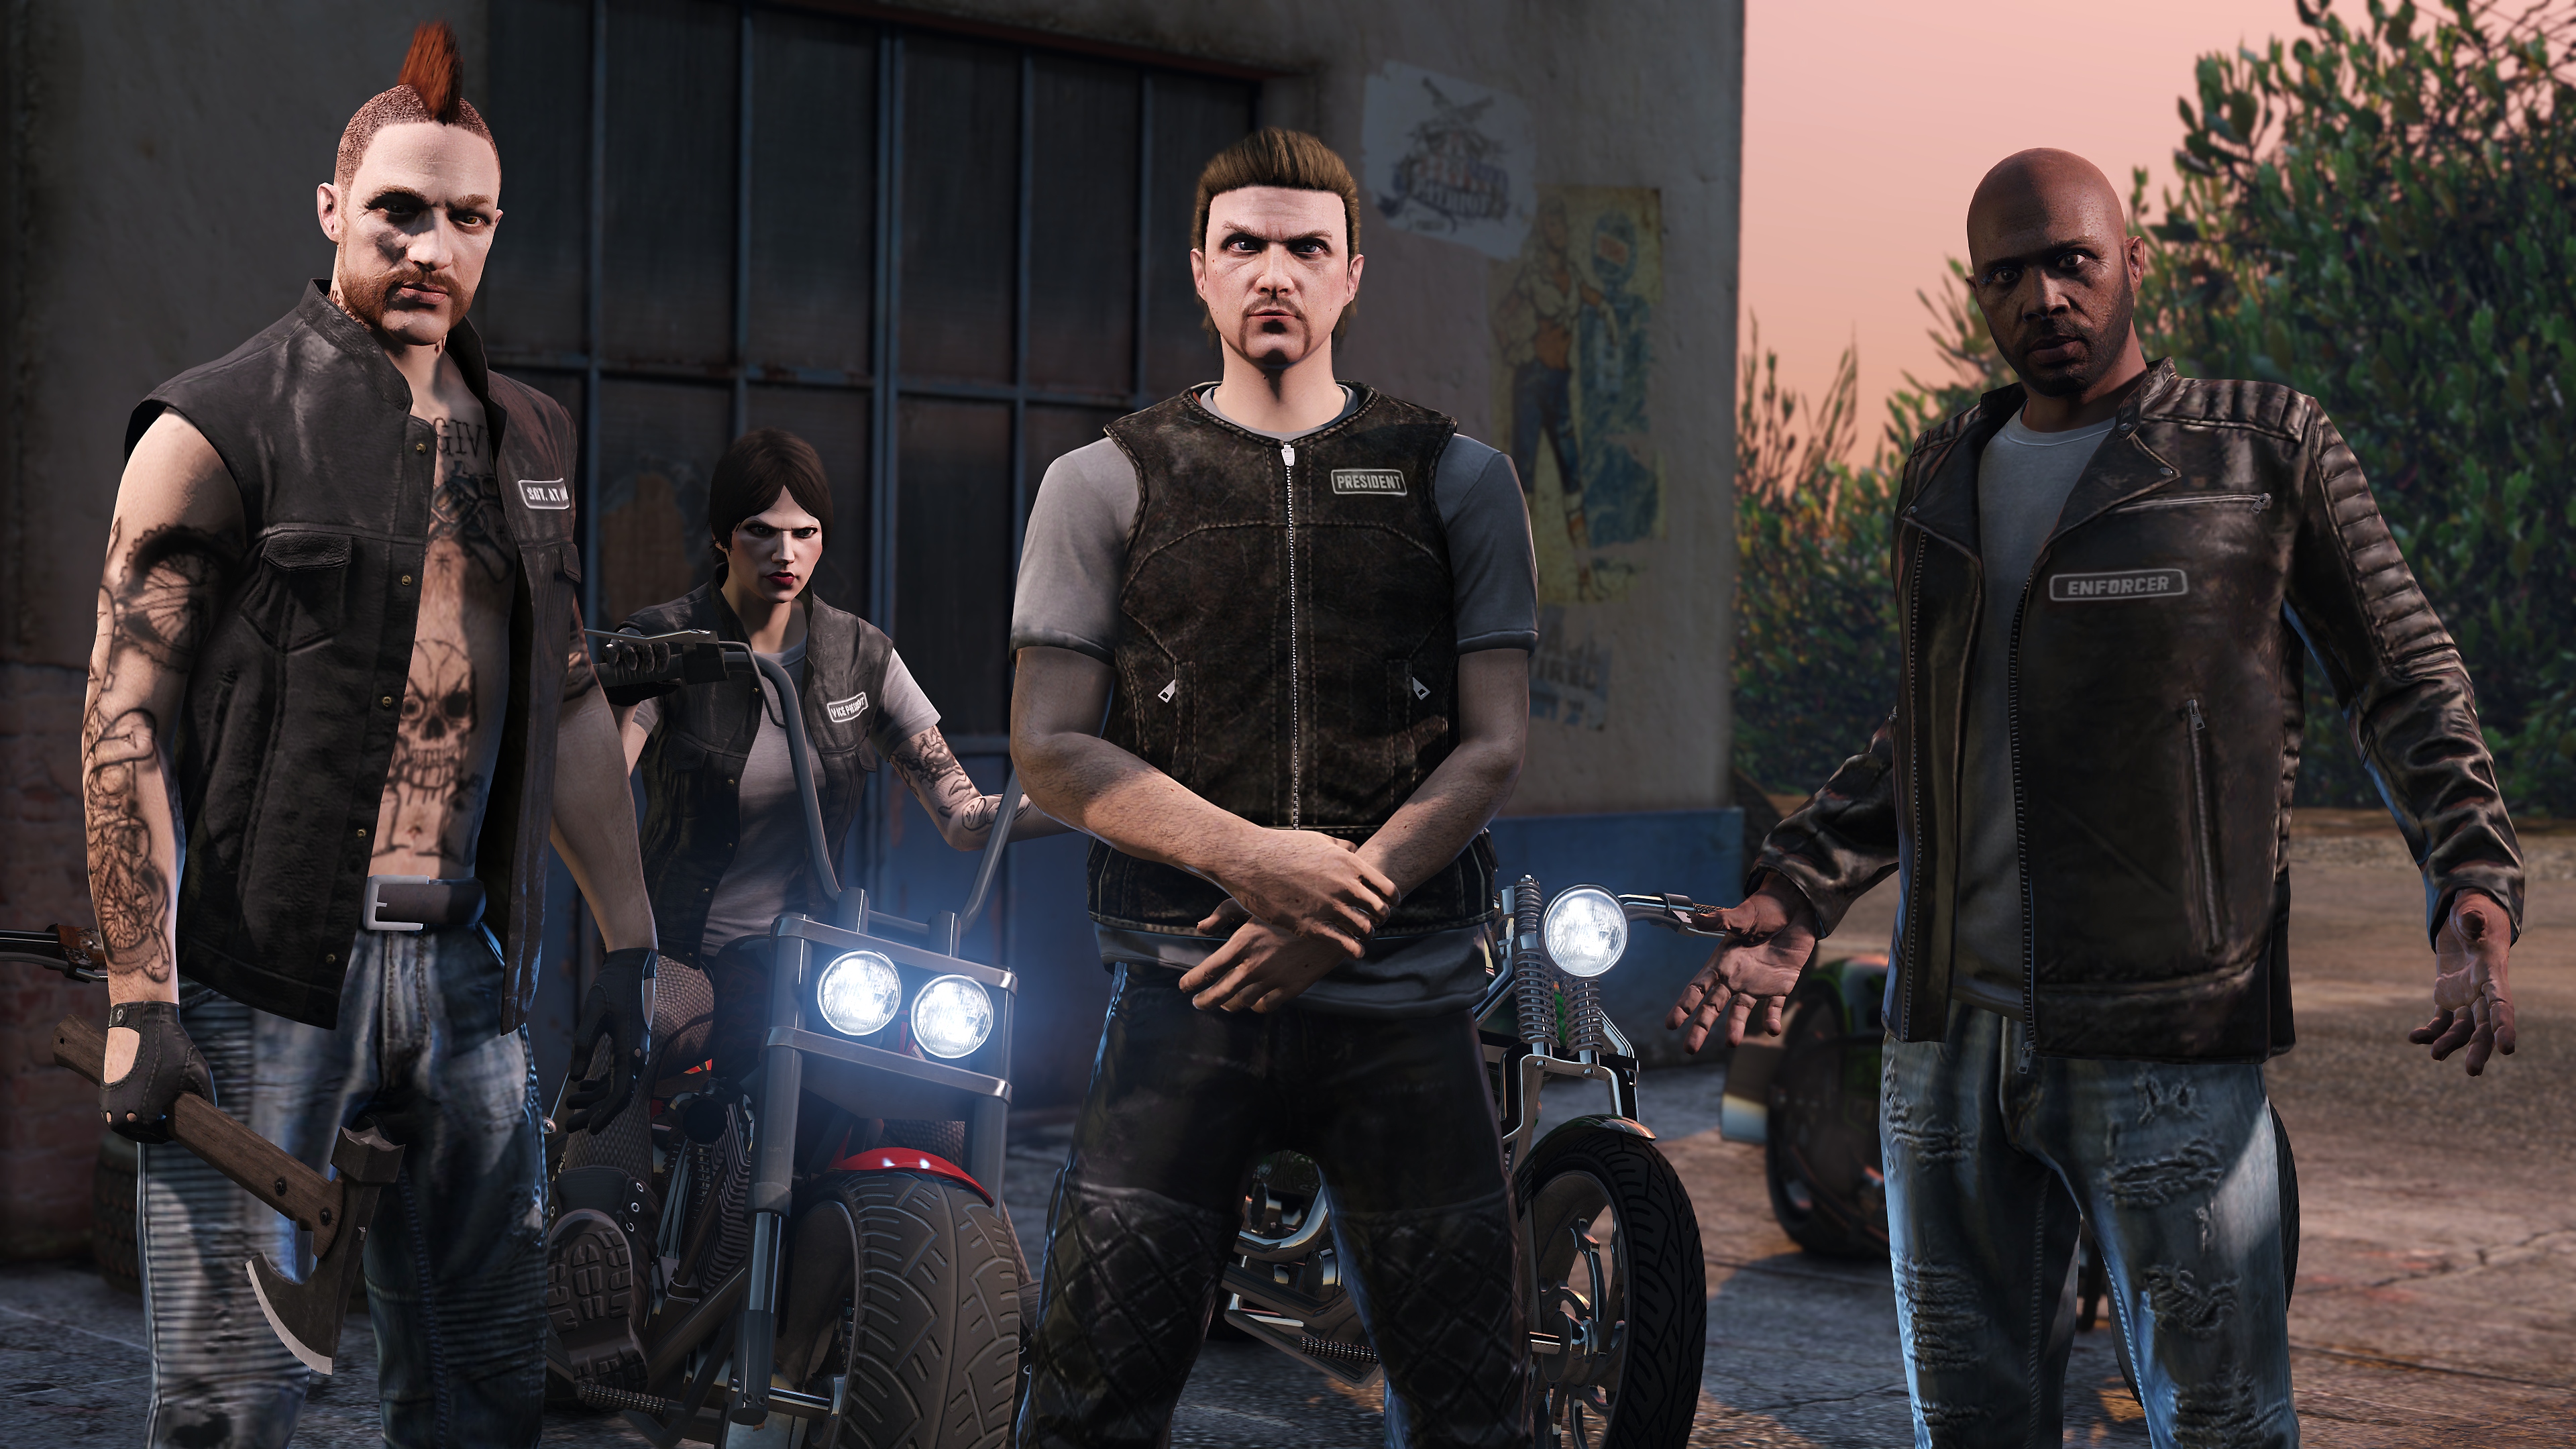 Grand Theft Auto Online trailer showing a gang of motorcyclists